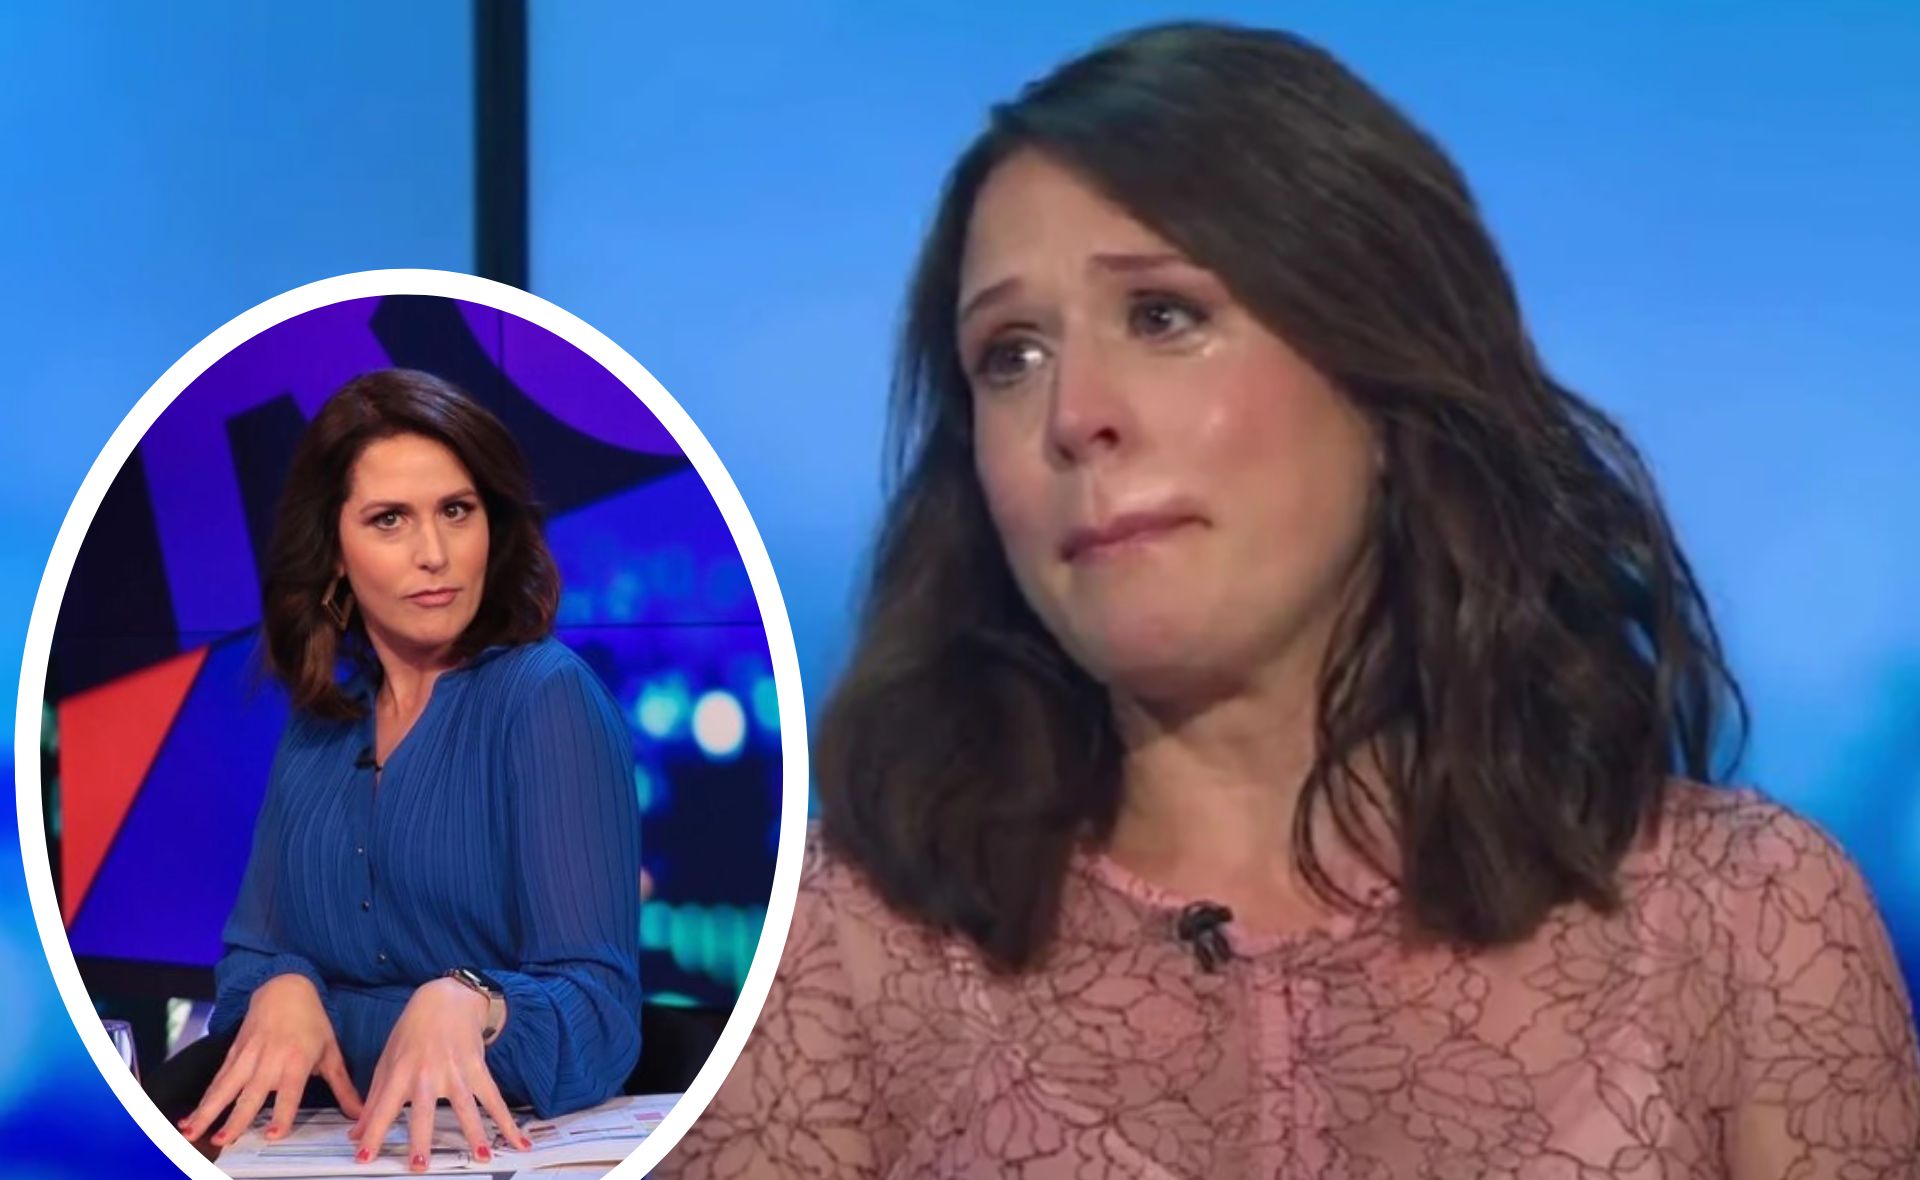 The Project loses another host as Rachel Corbett has tearful last show